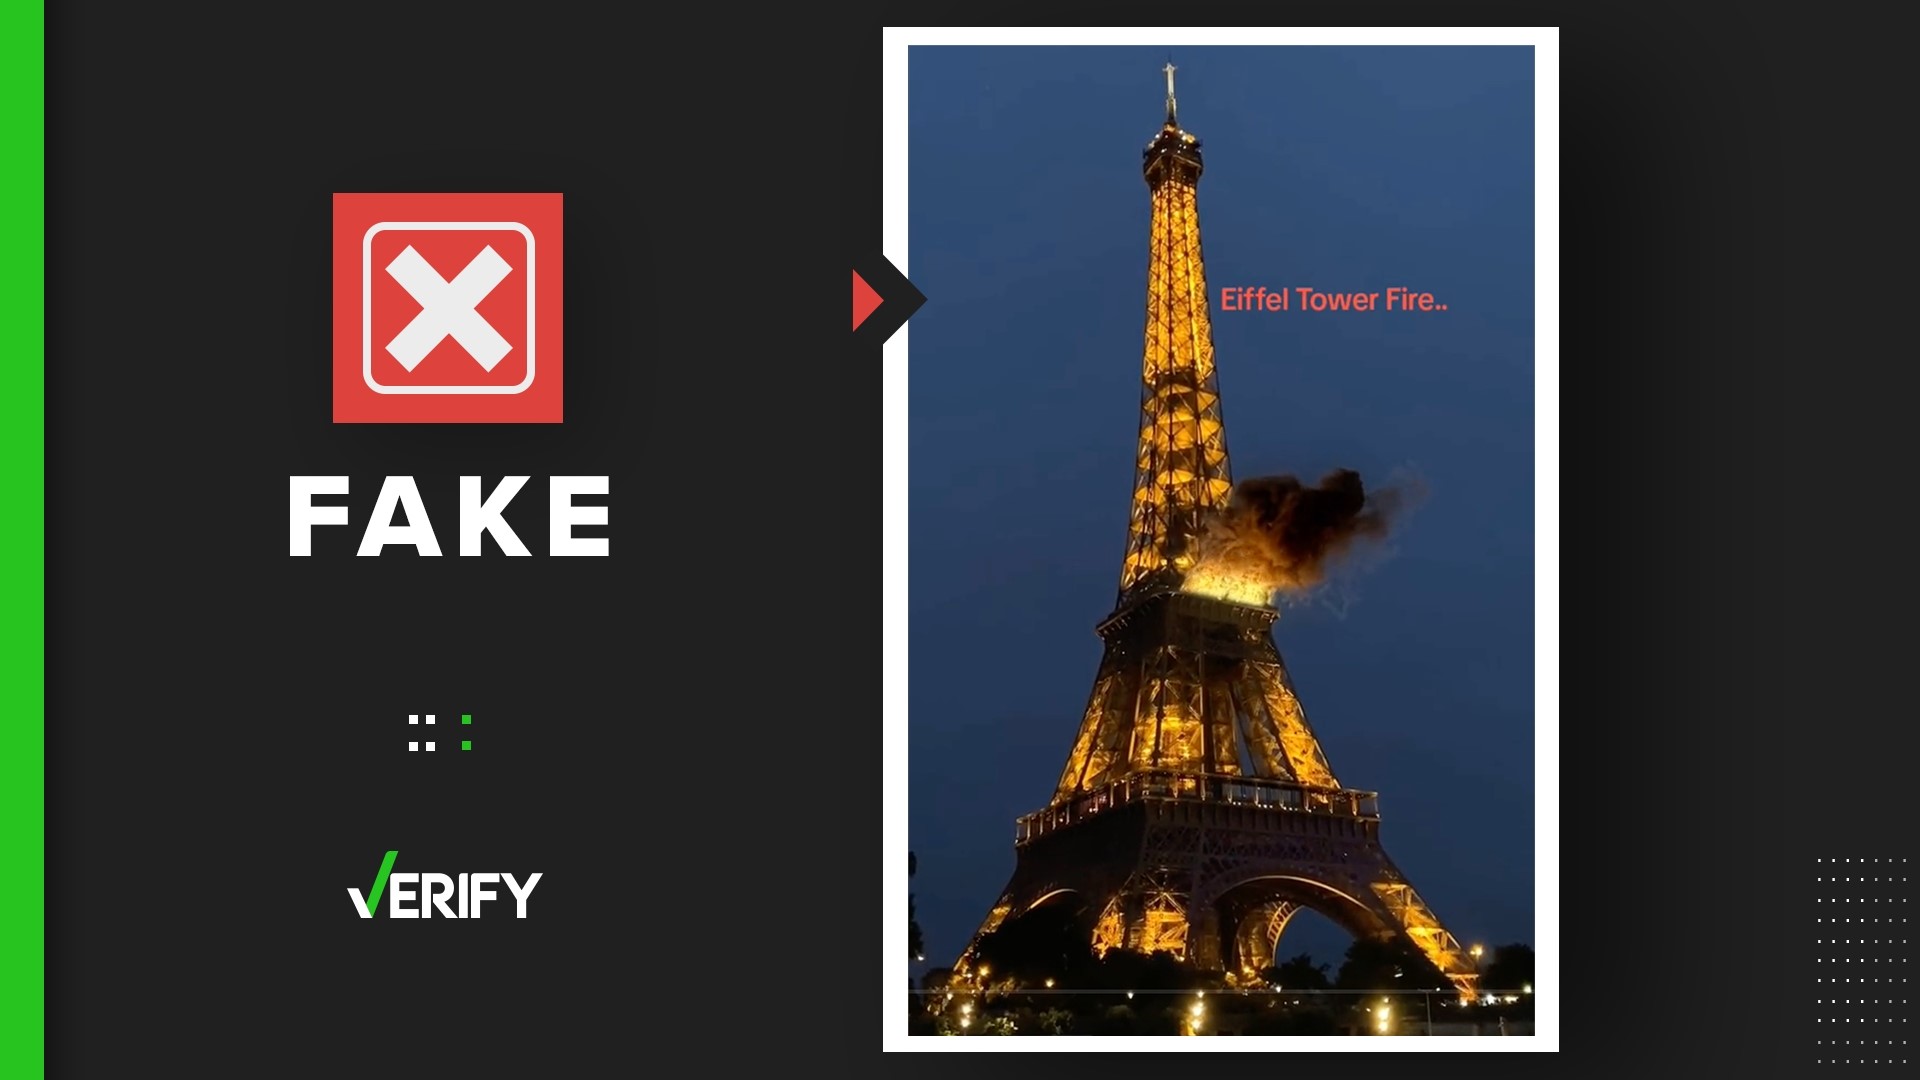 A viral TikTok video has spawned rumors that the Eiffel Tower in Paris, France, caught fire, but that’s not true. The flames in that video were made with CGI.